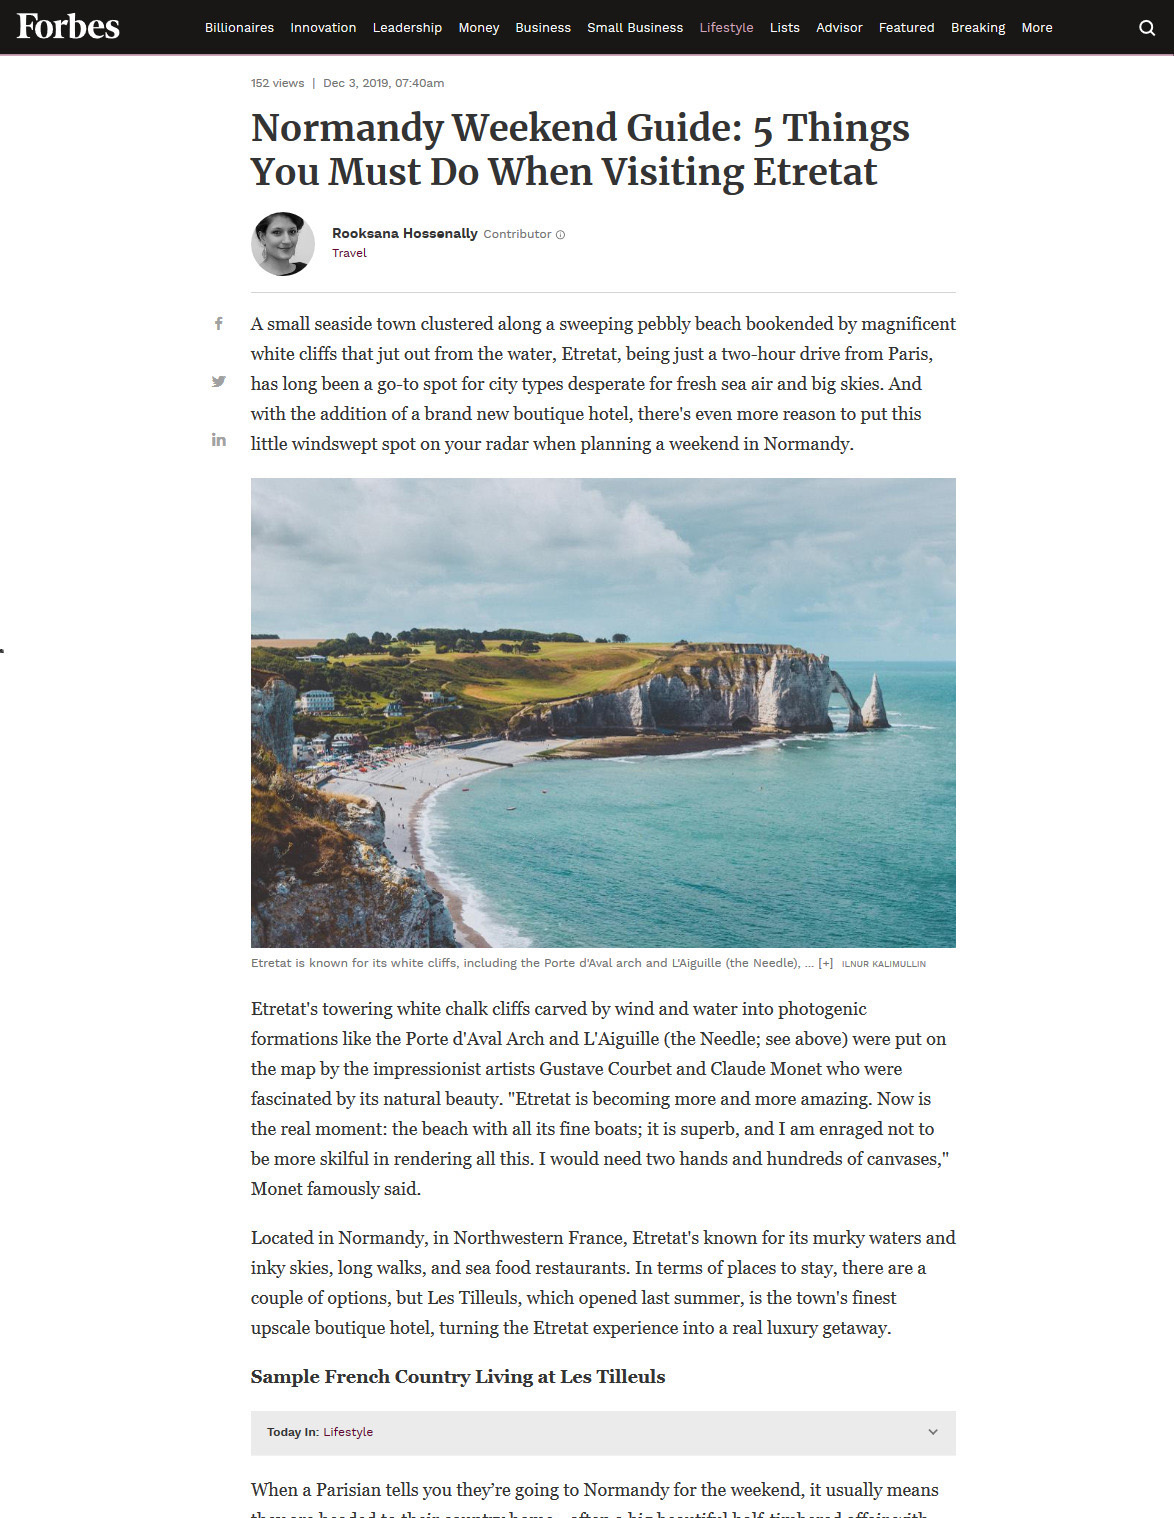 Forbes: Normandy Weekend Guide. 5 Things You Must Do When Visiting Etretat